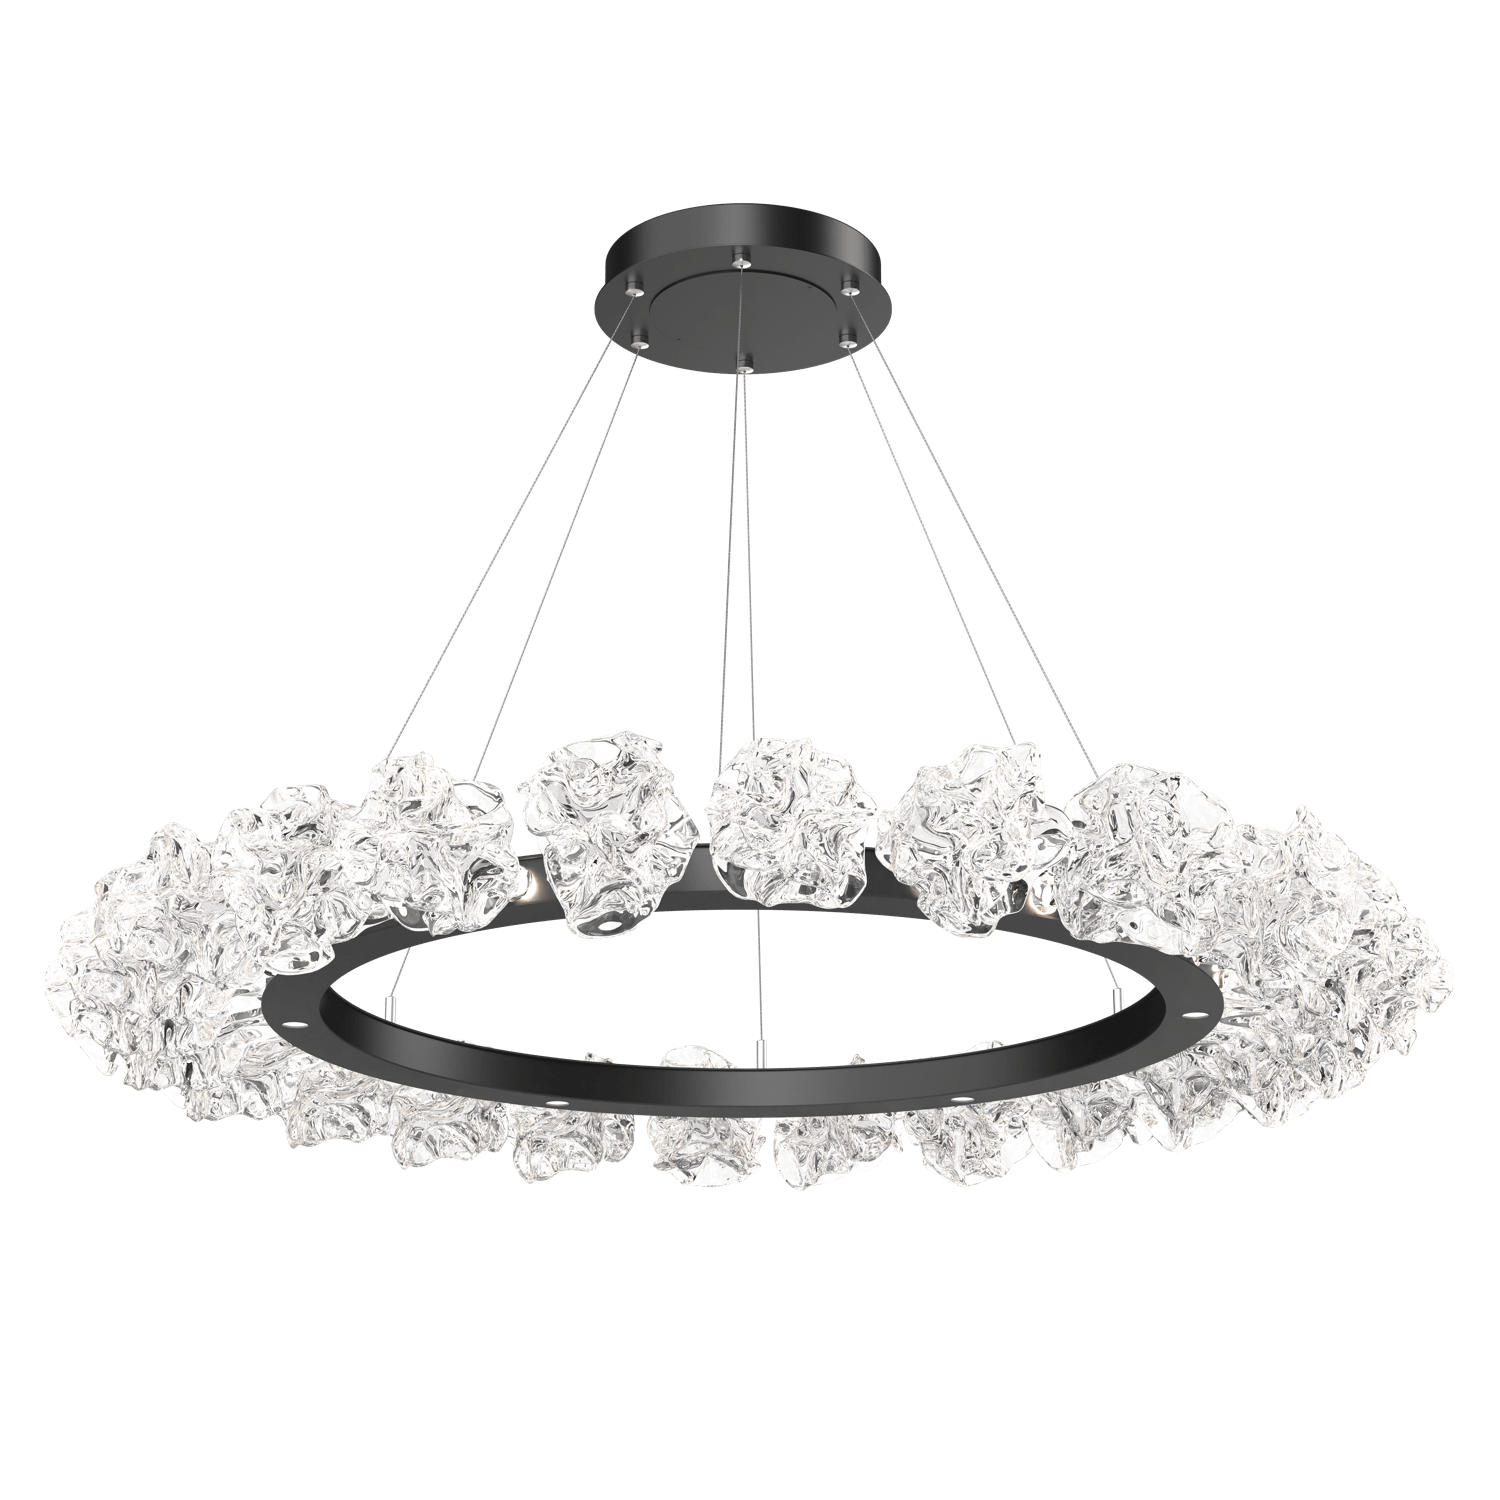 CHB0059-50-MB-Hammerton-Studio-Blossom-50-inch-radial-ring-chandelier-with-matte-black-finish-and-clear-handblown-crystal-glass-shades-and-LED-lamping